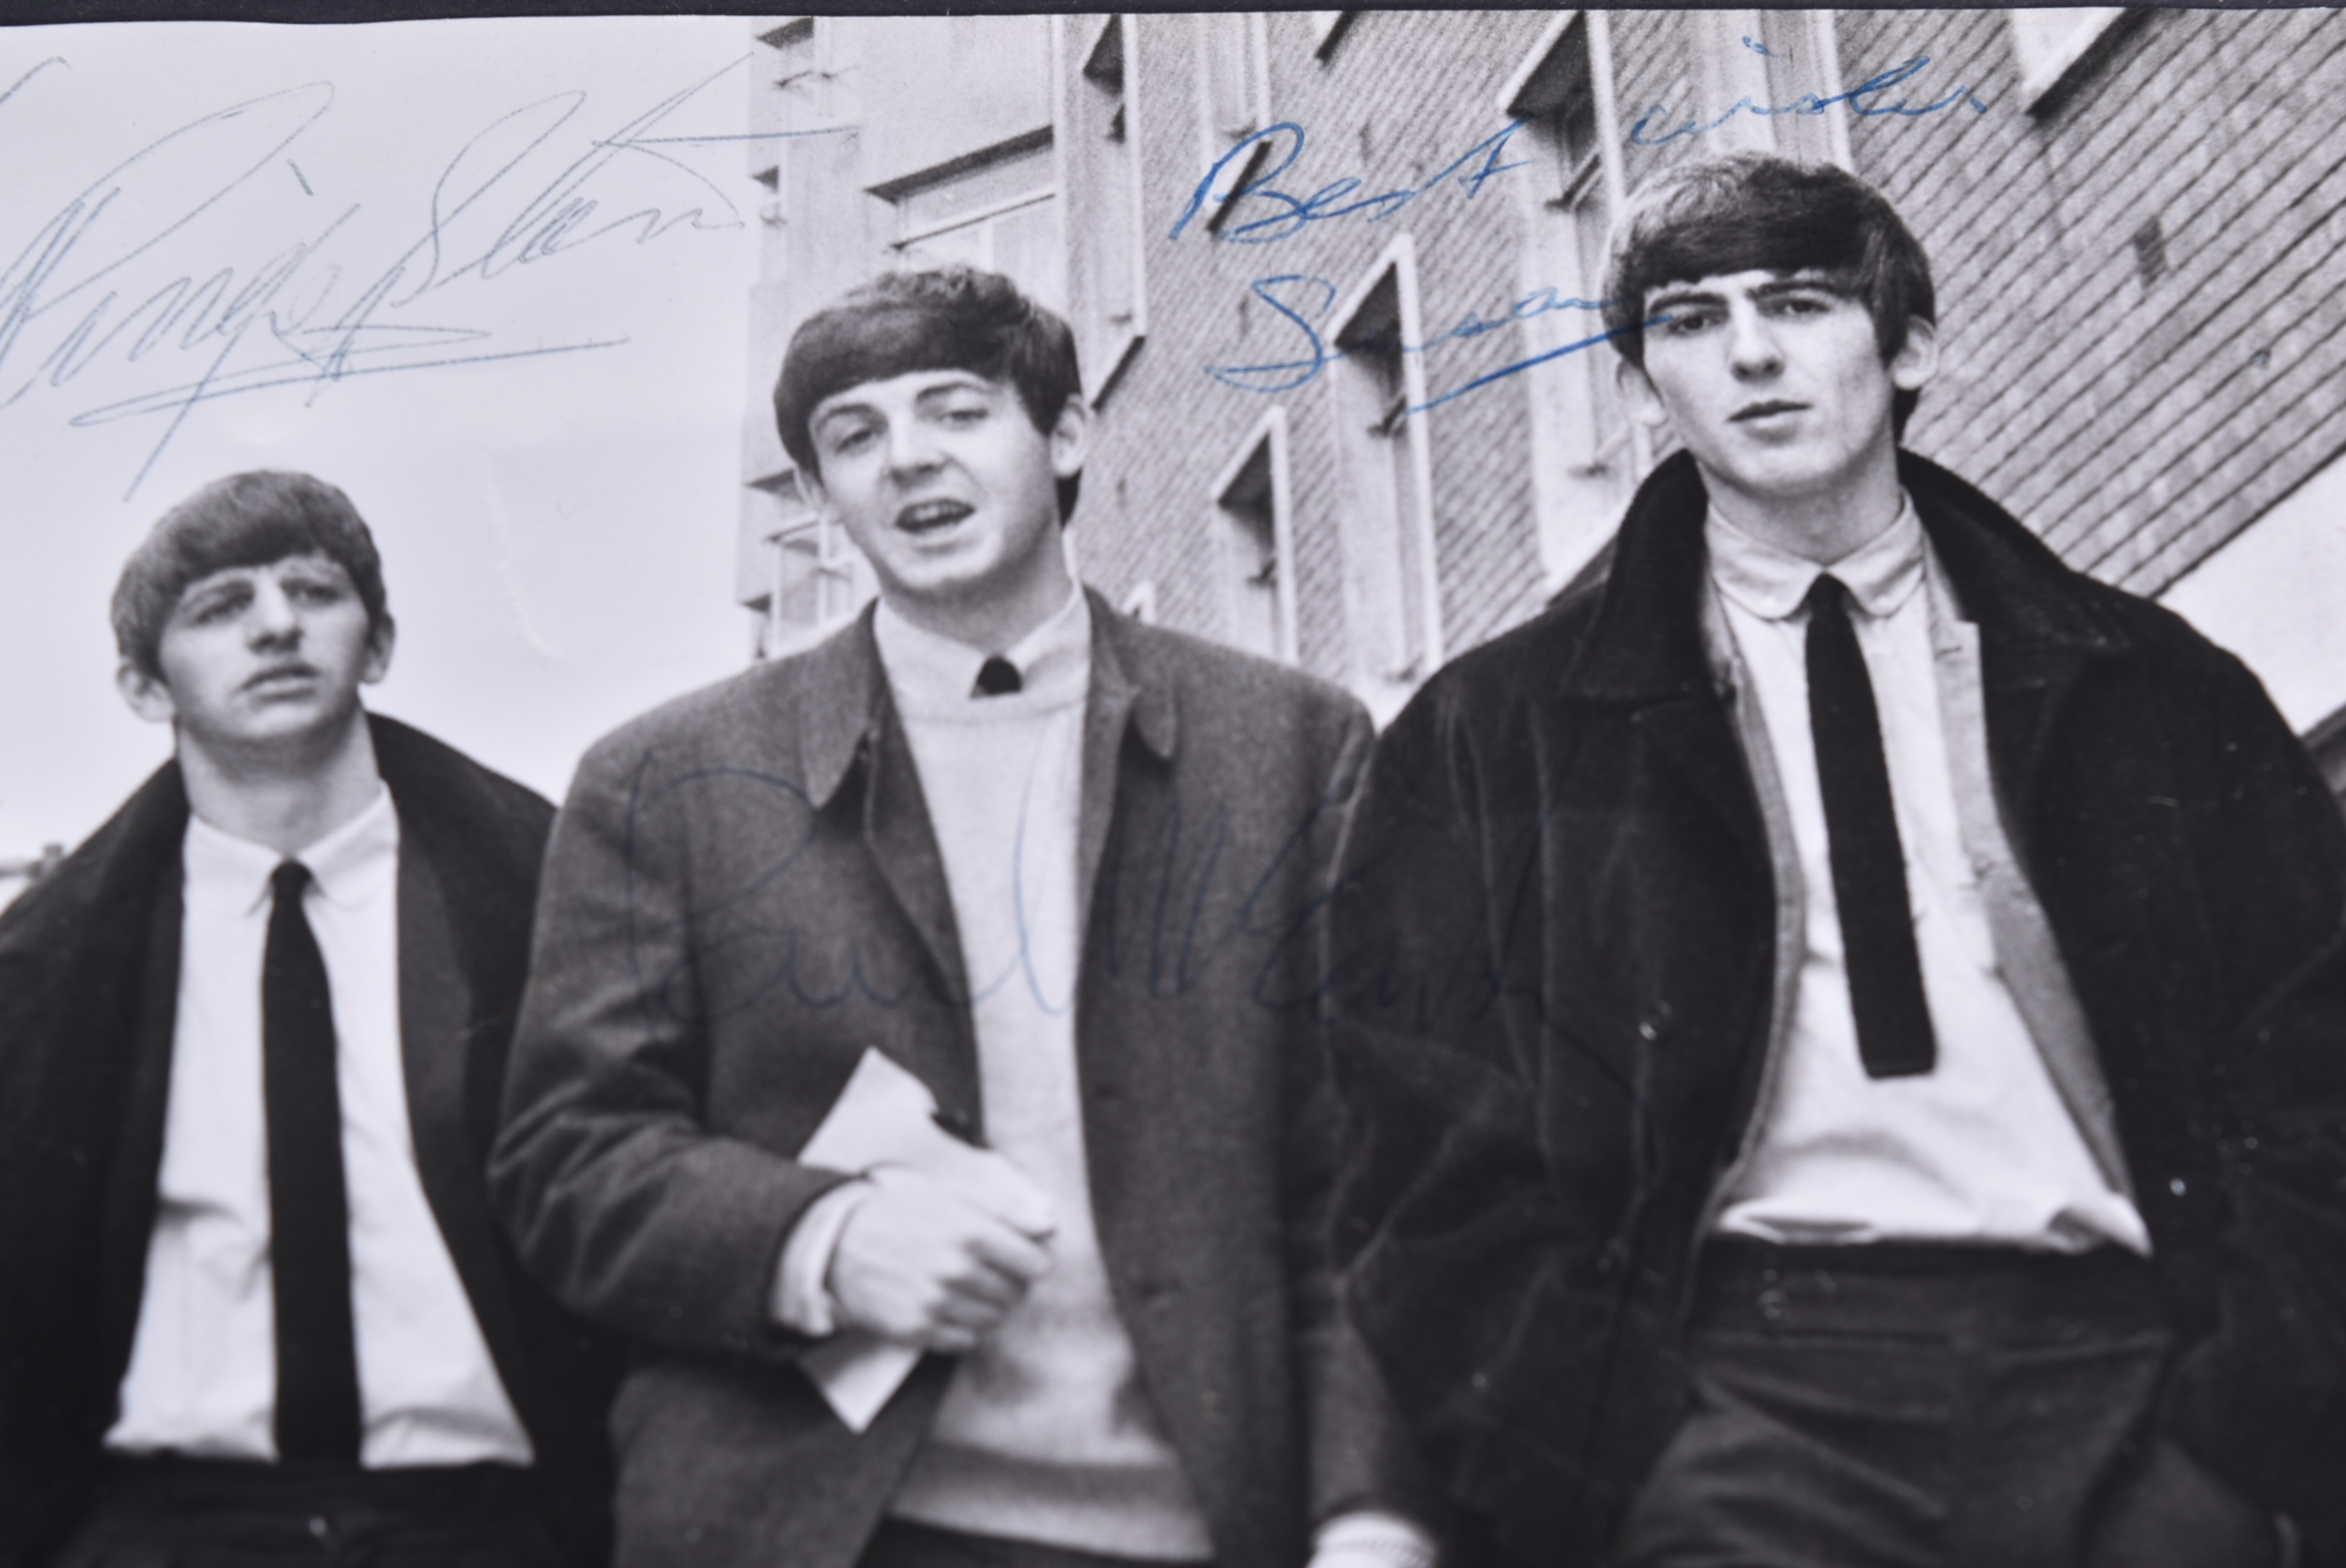 THE BEATLES - 8X10" PHOTOGRAPH SIGNED BY ALL FOUR MEMBERS - Image 3 of 6